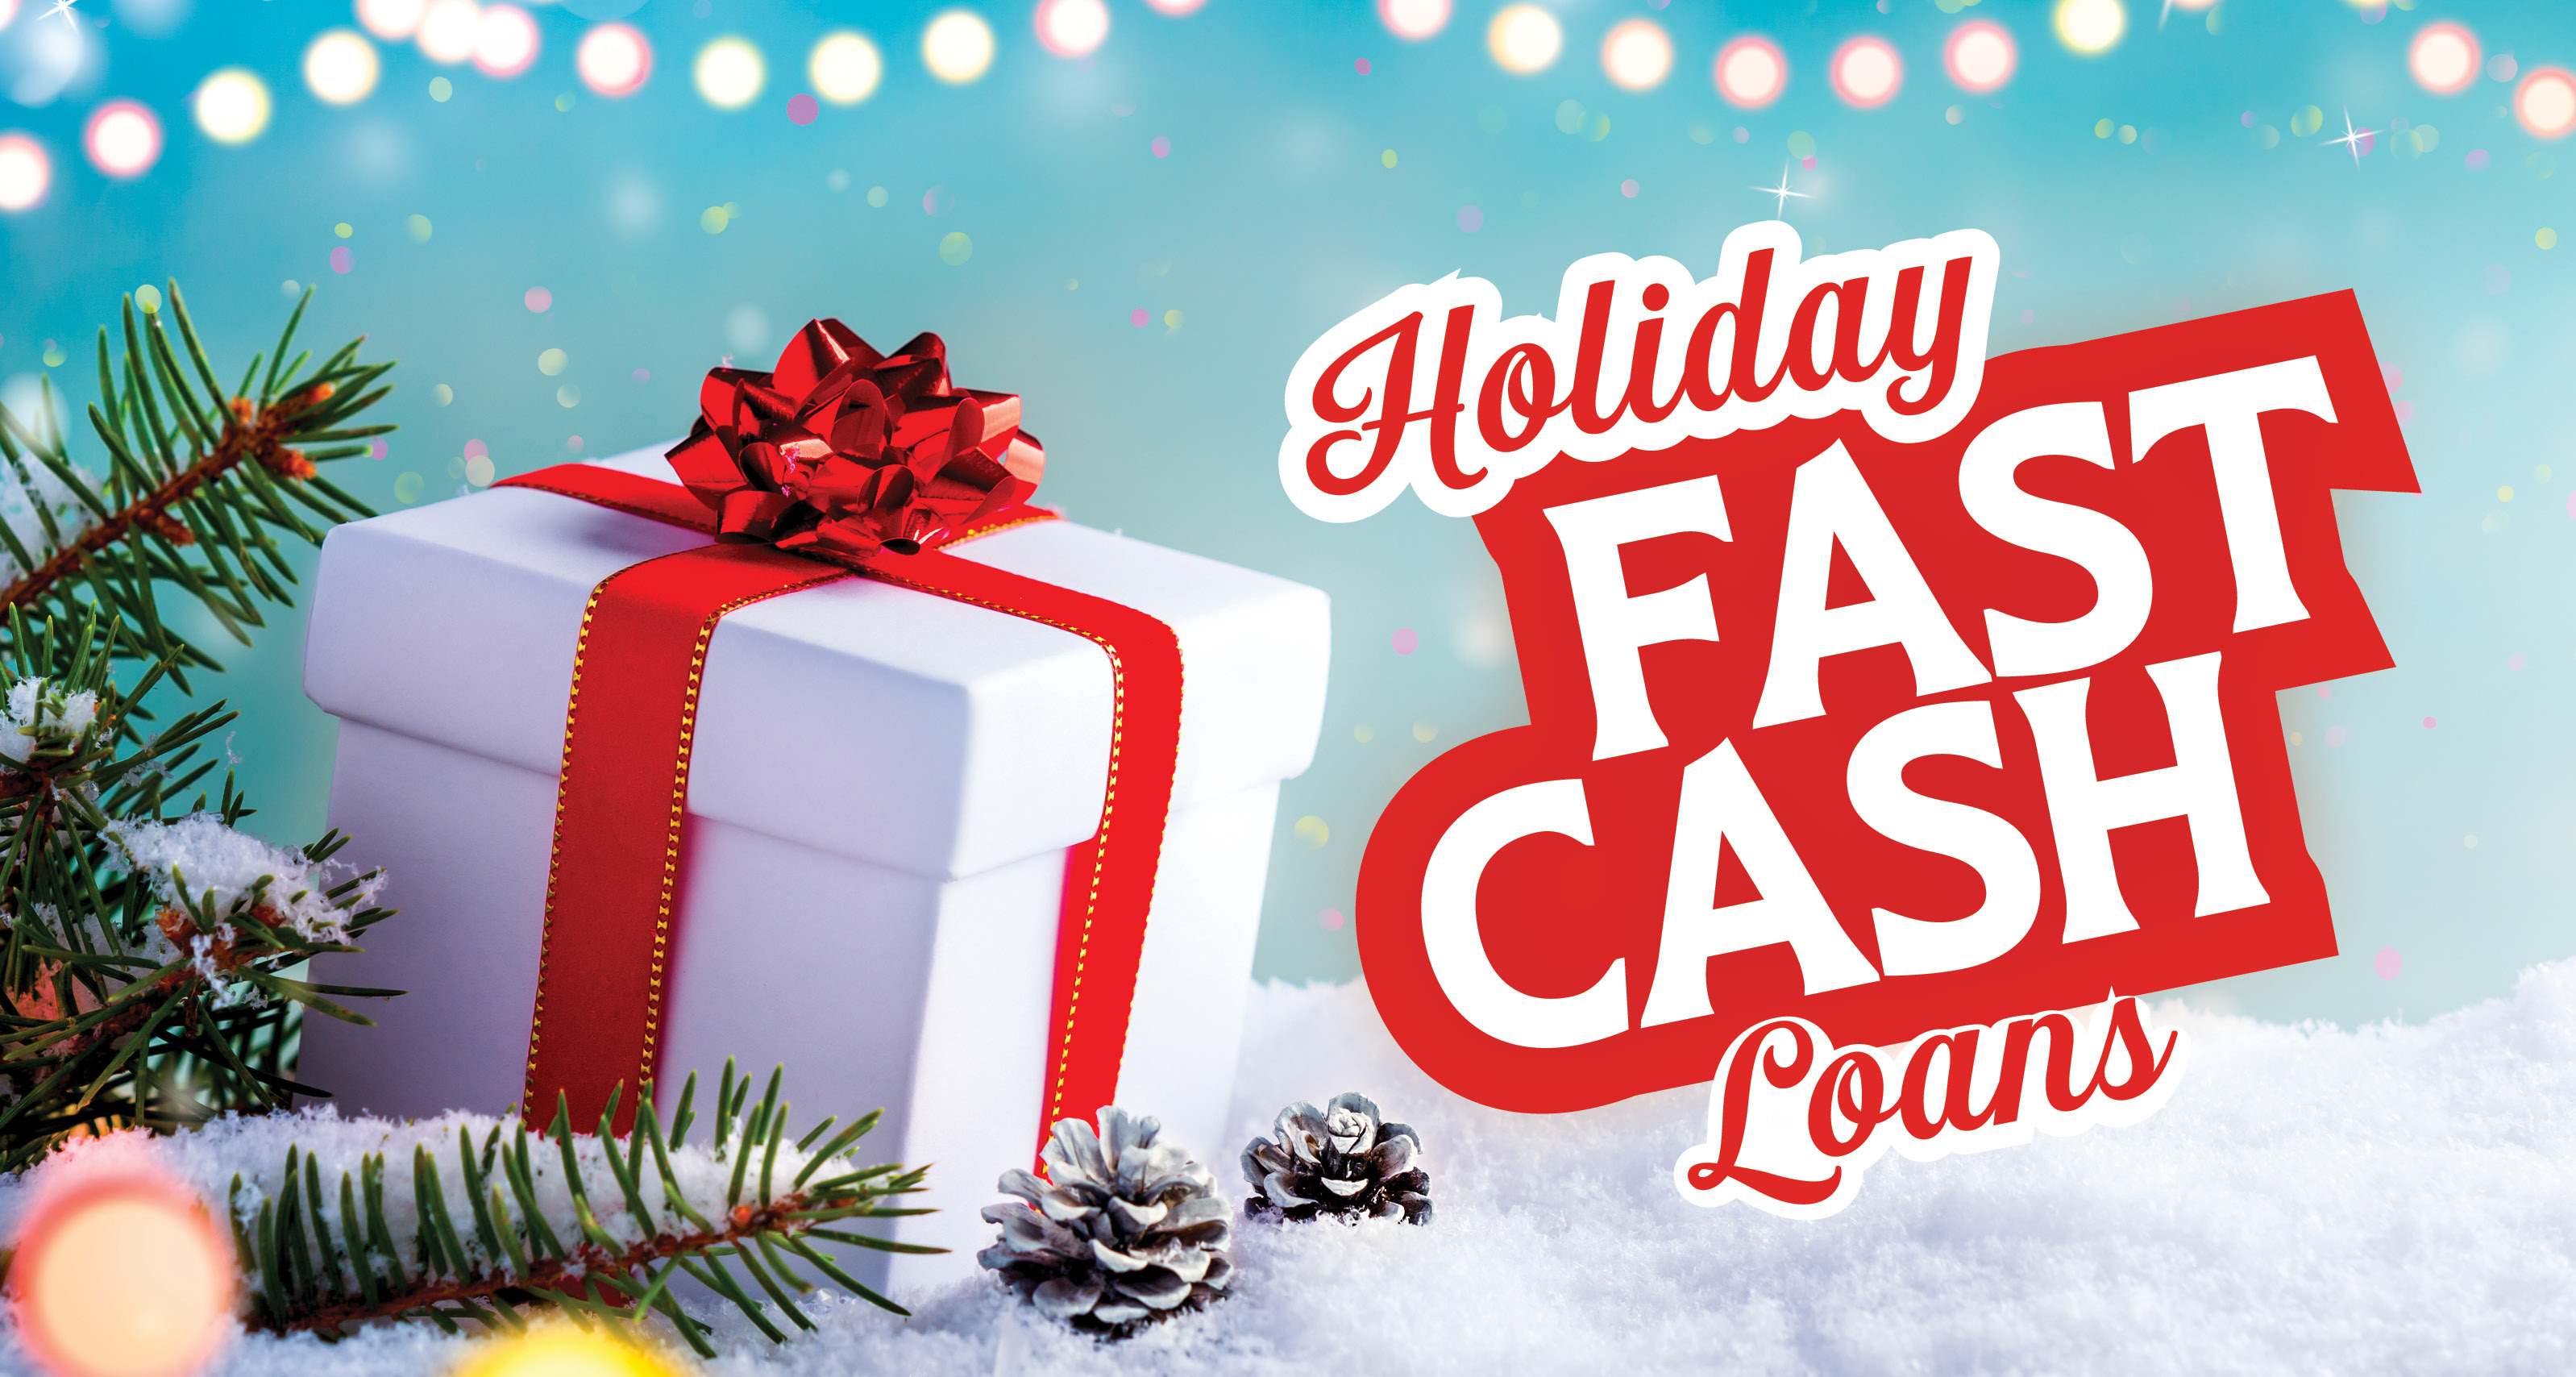 Spread The Holiday Cheer With A Holiday Fast Cash Loan